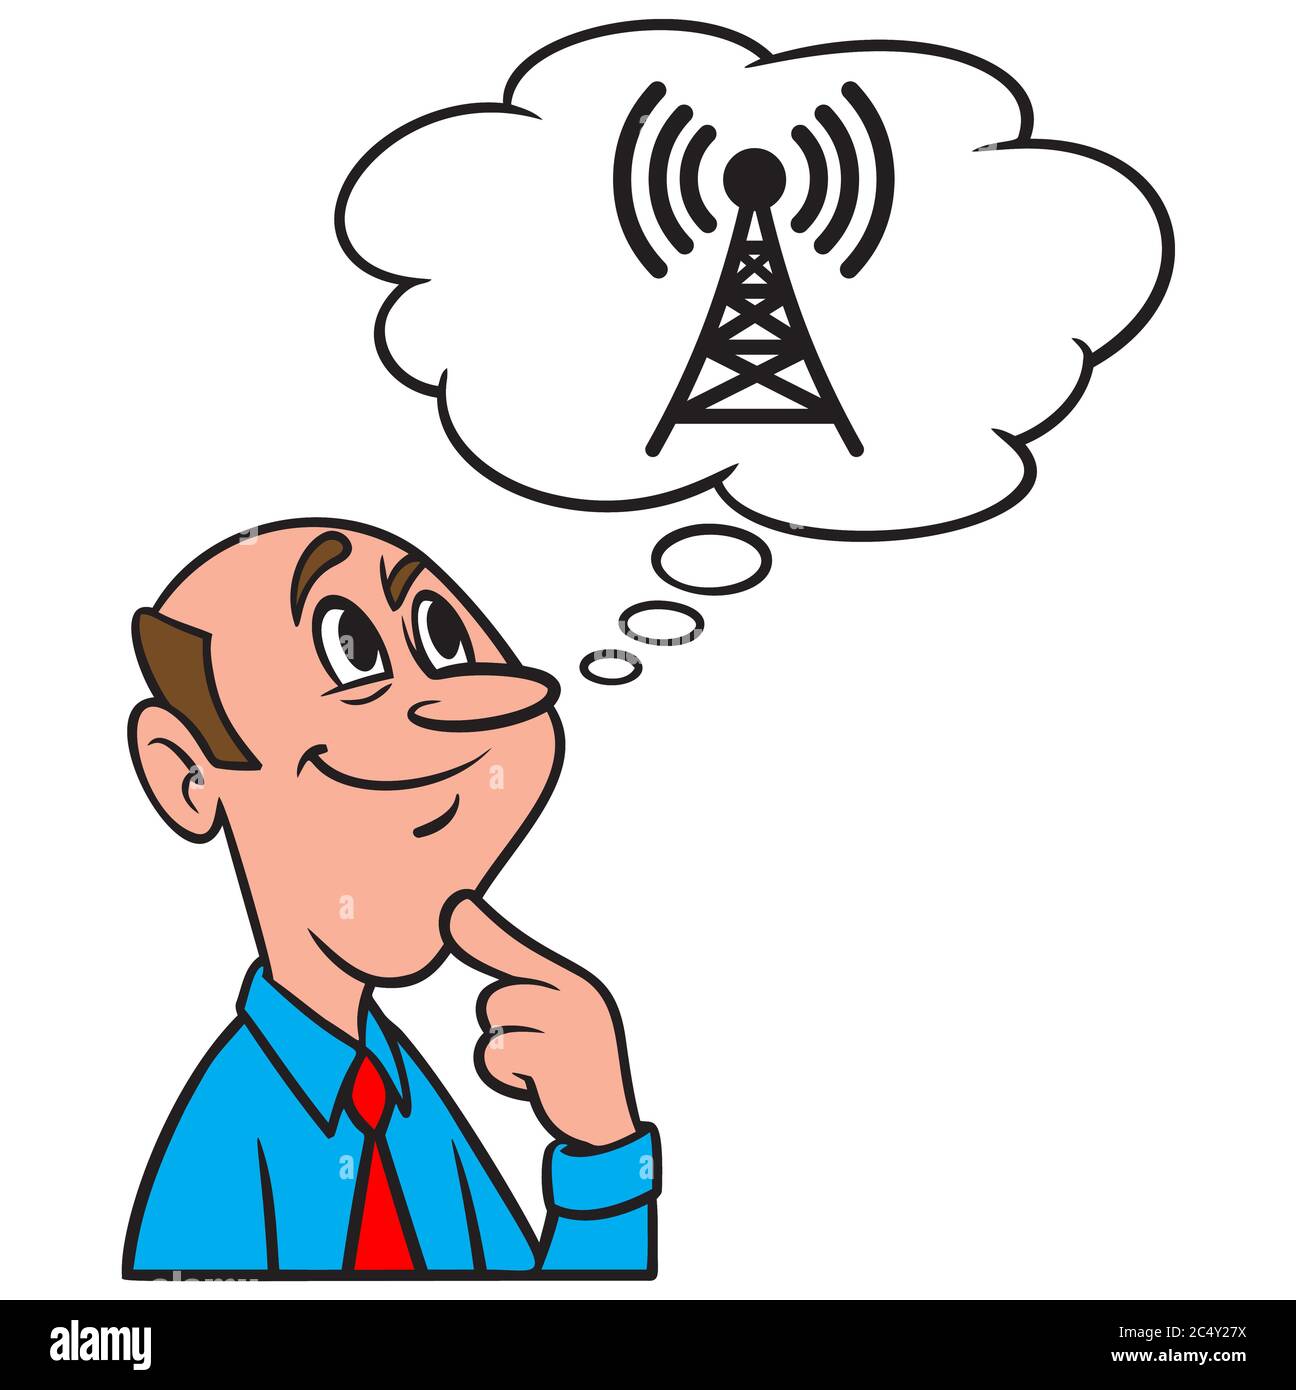 Thinking About A Broadcast Tower Signal-An Illustration of a person Thinking About a Broadcast Tower Signal. Stock Vector